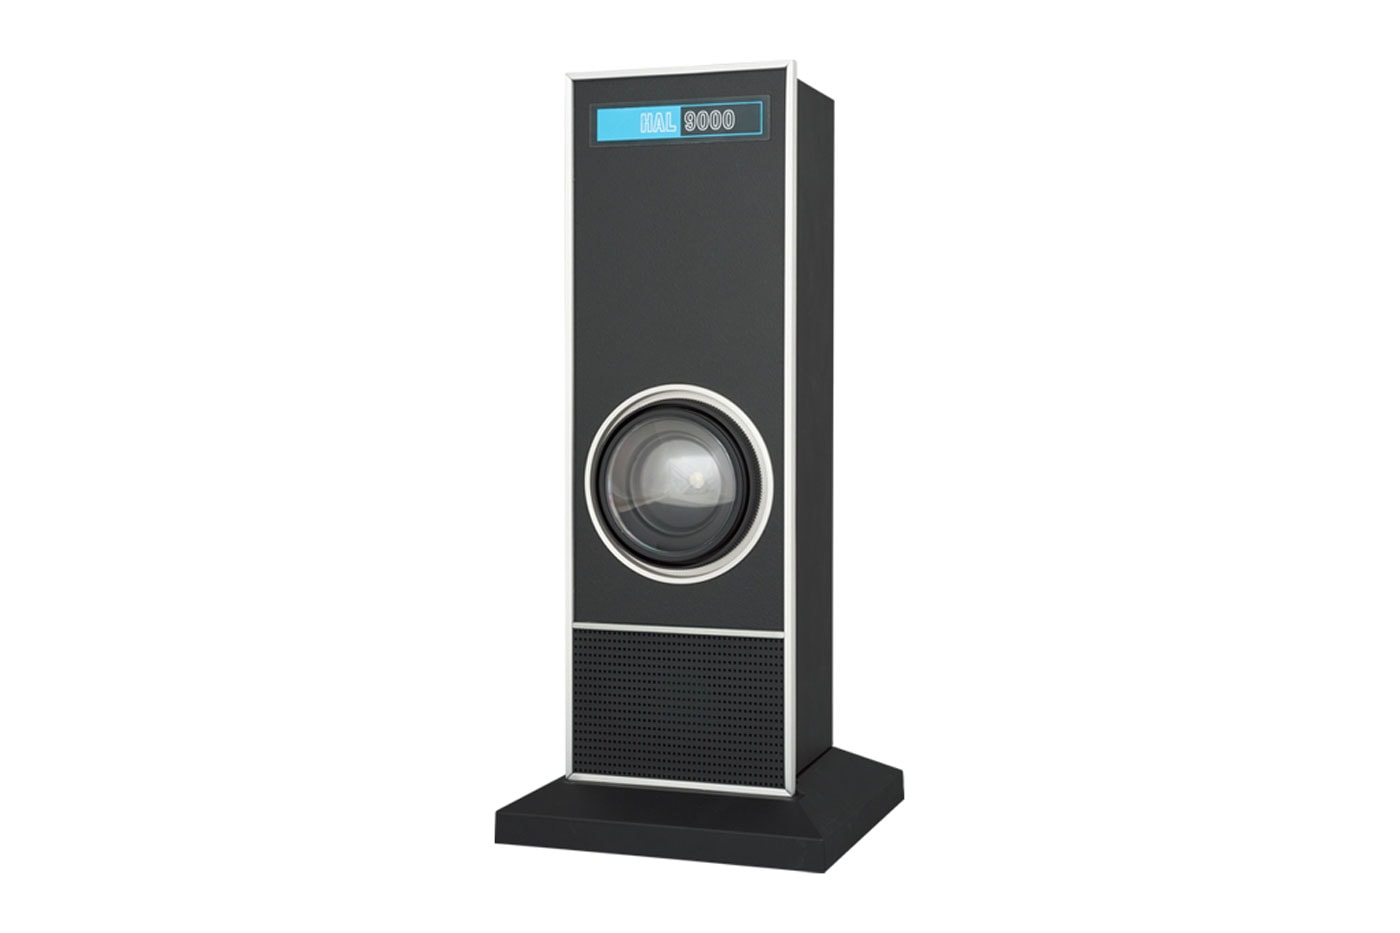 Medicom Toy Recreates the HAL 9000 Computer From 2001: A Space Odyssey 